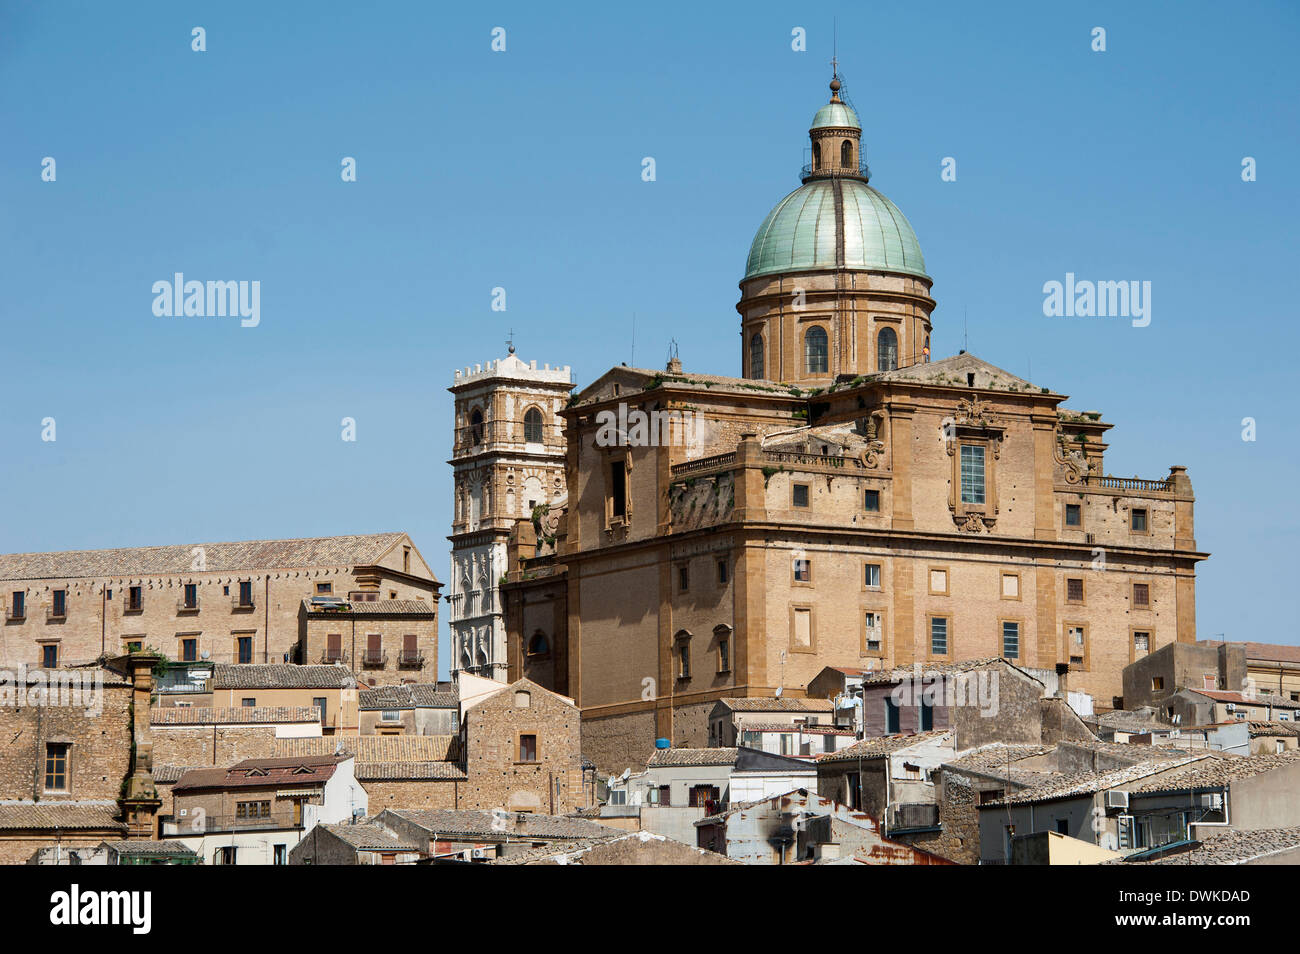 Old town, Piazza Armerina Stock Photo